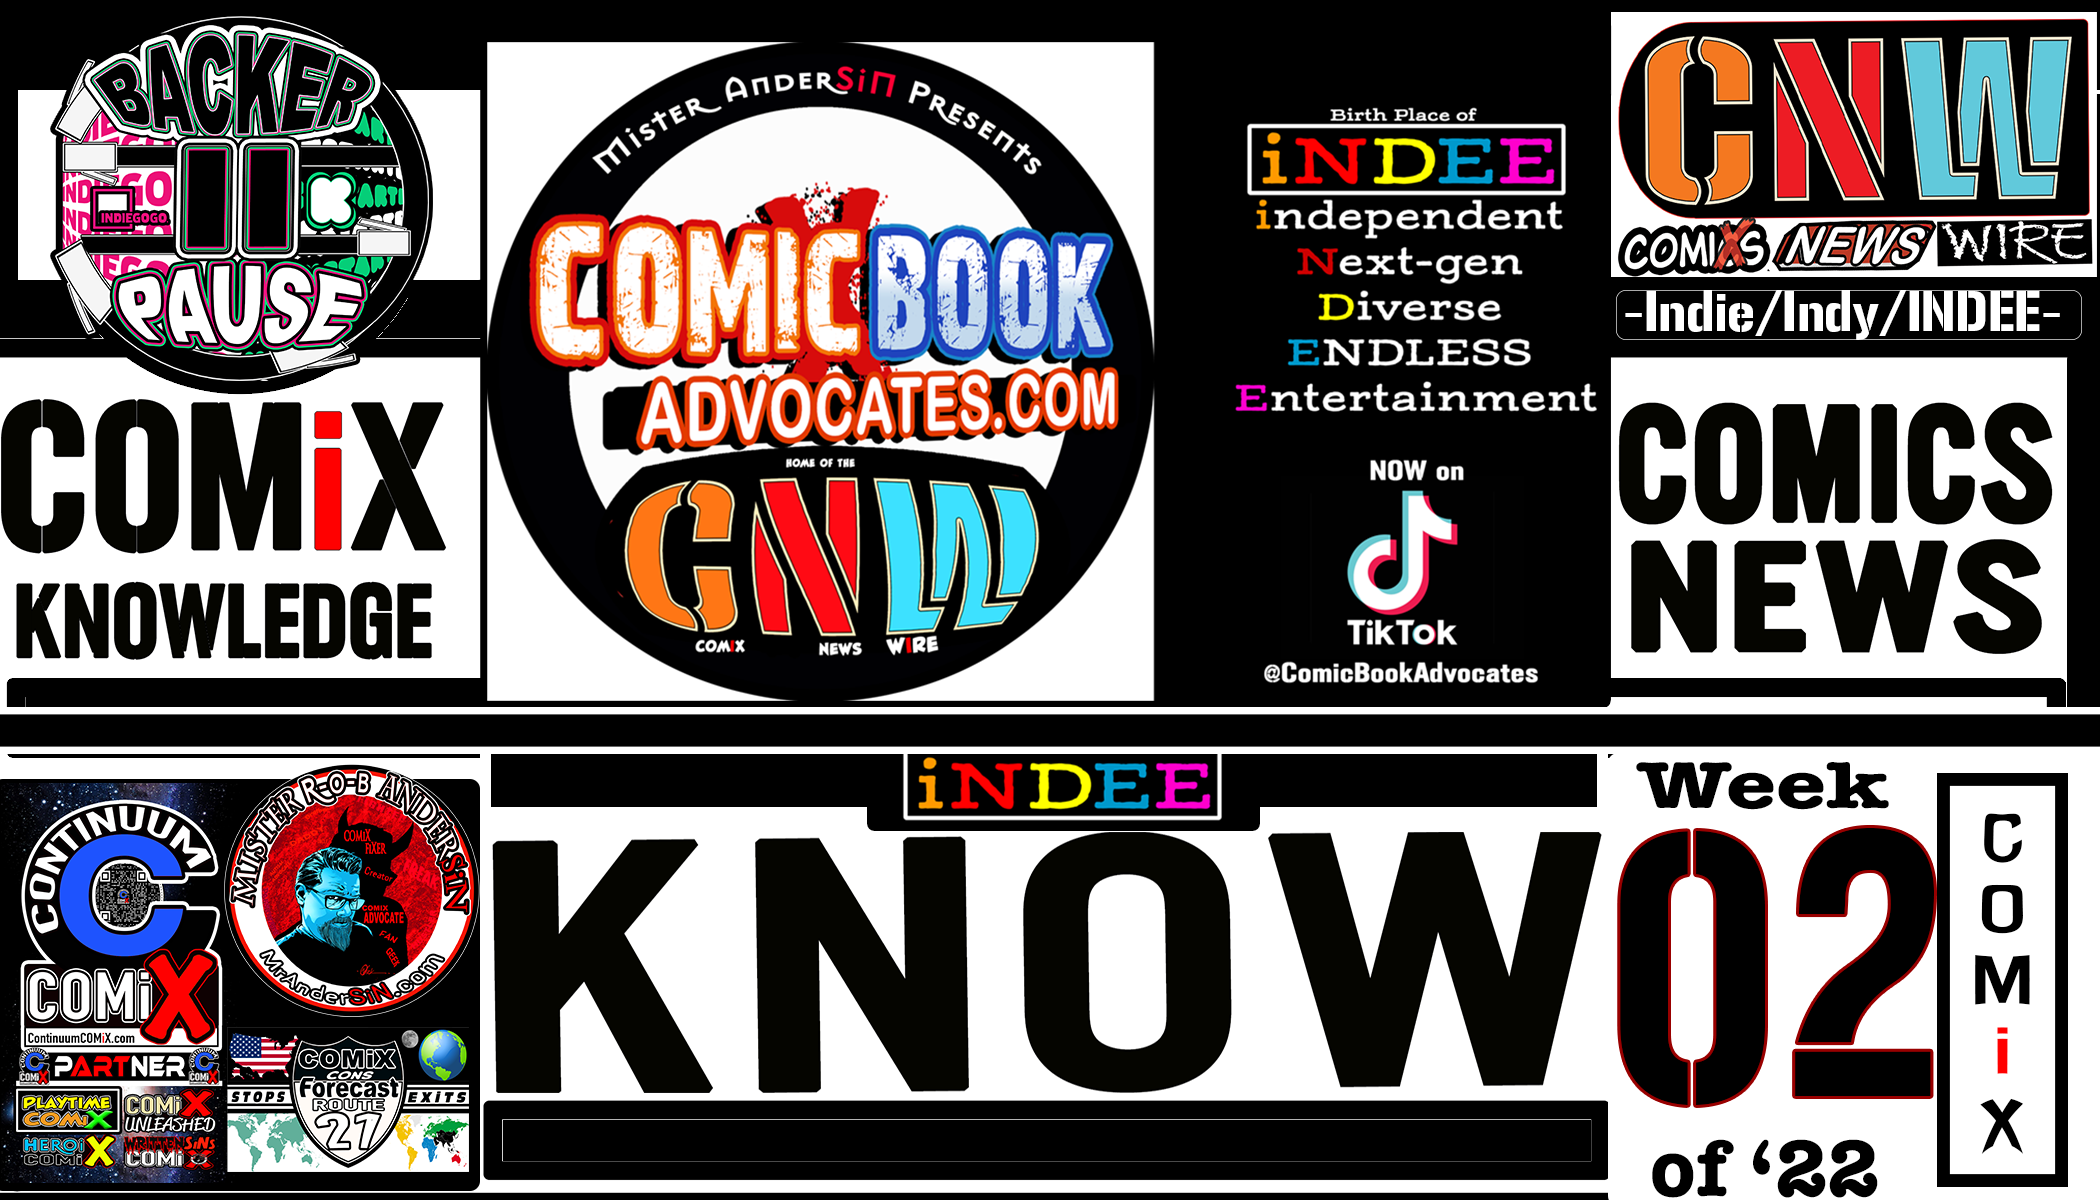 The INDEE NEWS WiRE-Week  2 of 2022 part of THE COMiX NEWS WiRE.